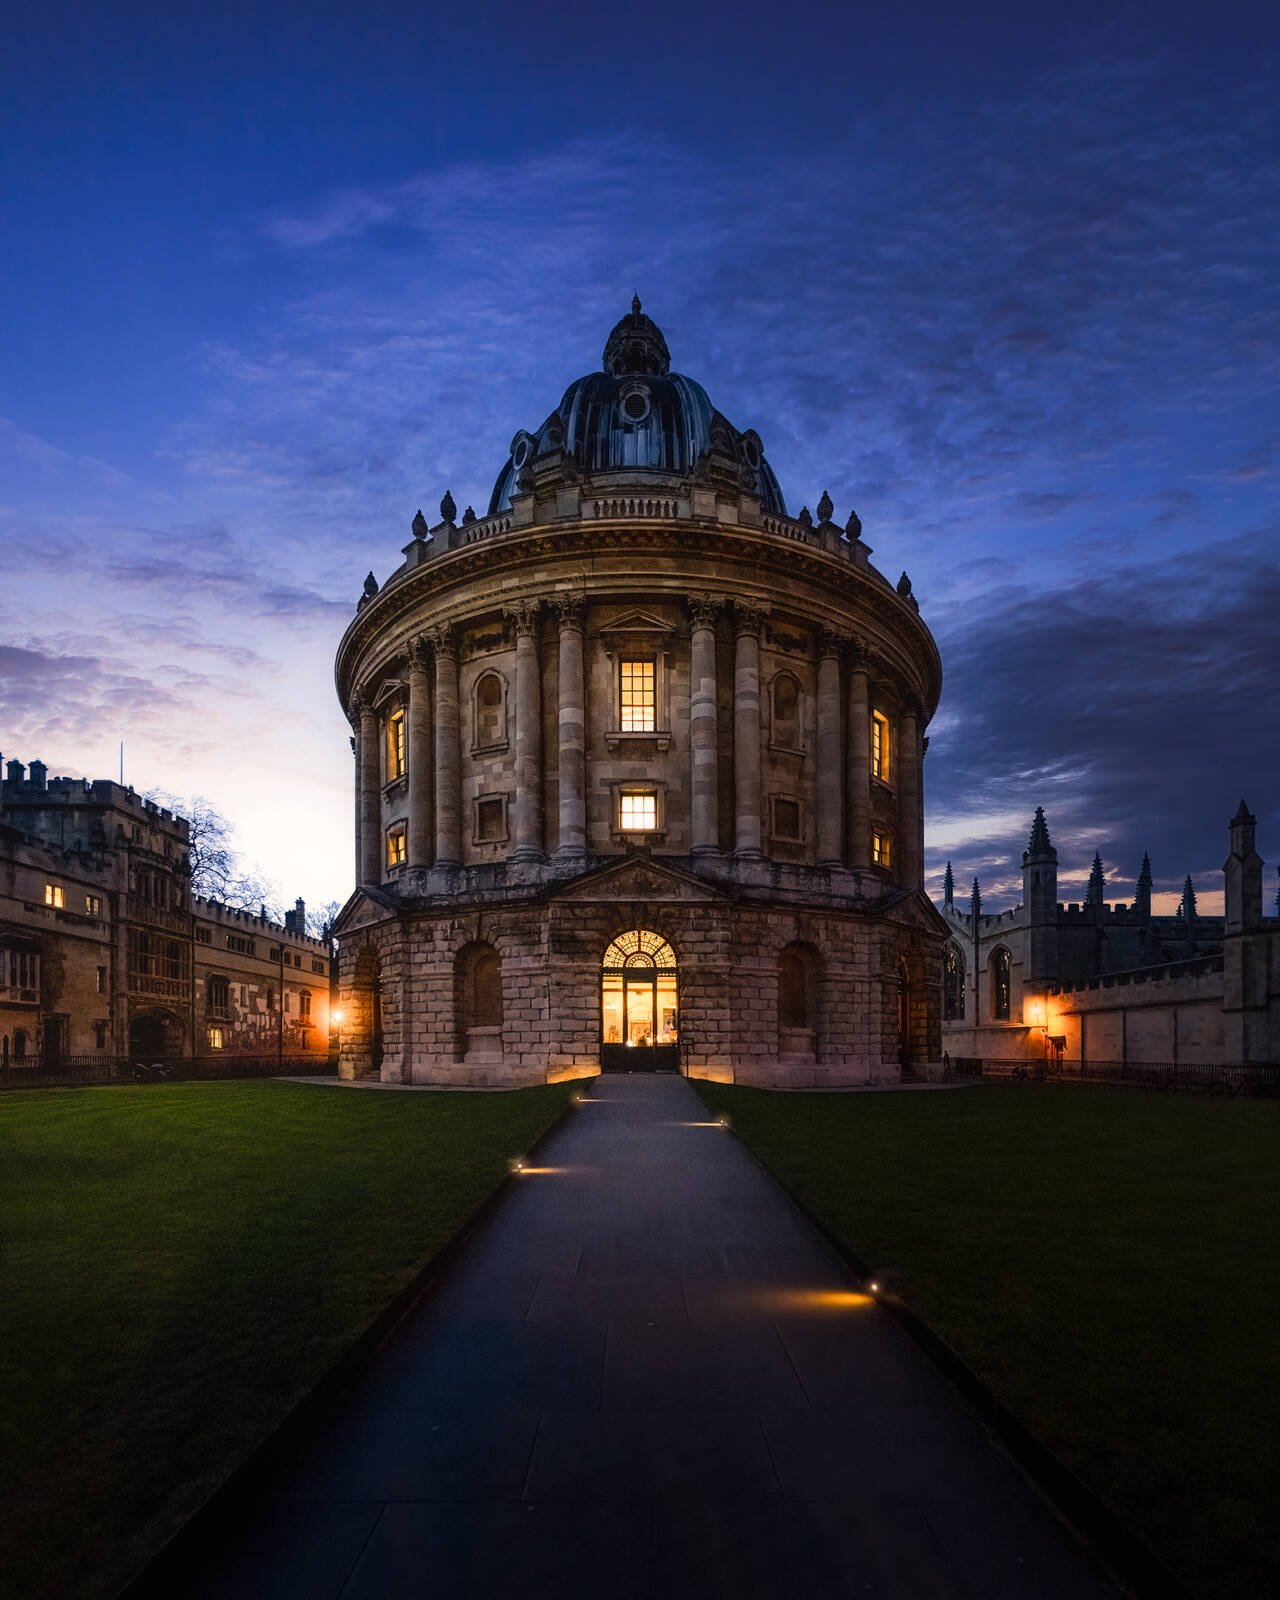 Image of View of the Radcliffe Camera by Jakub Bors